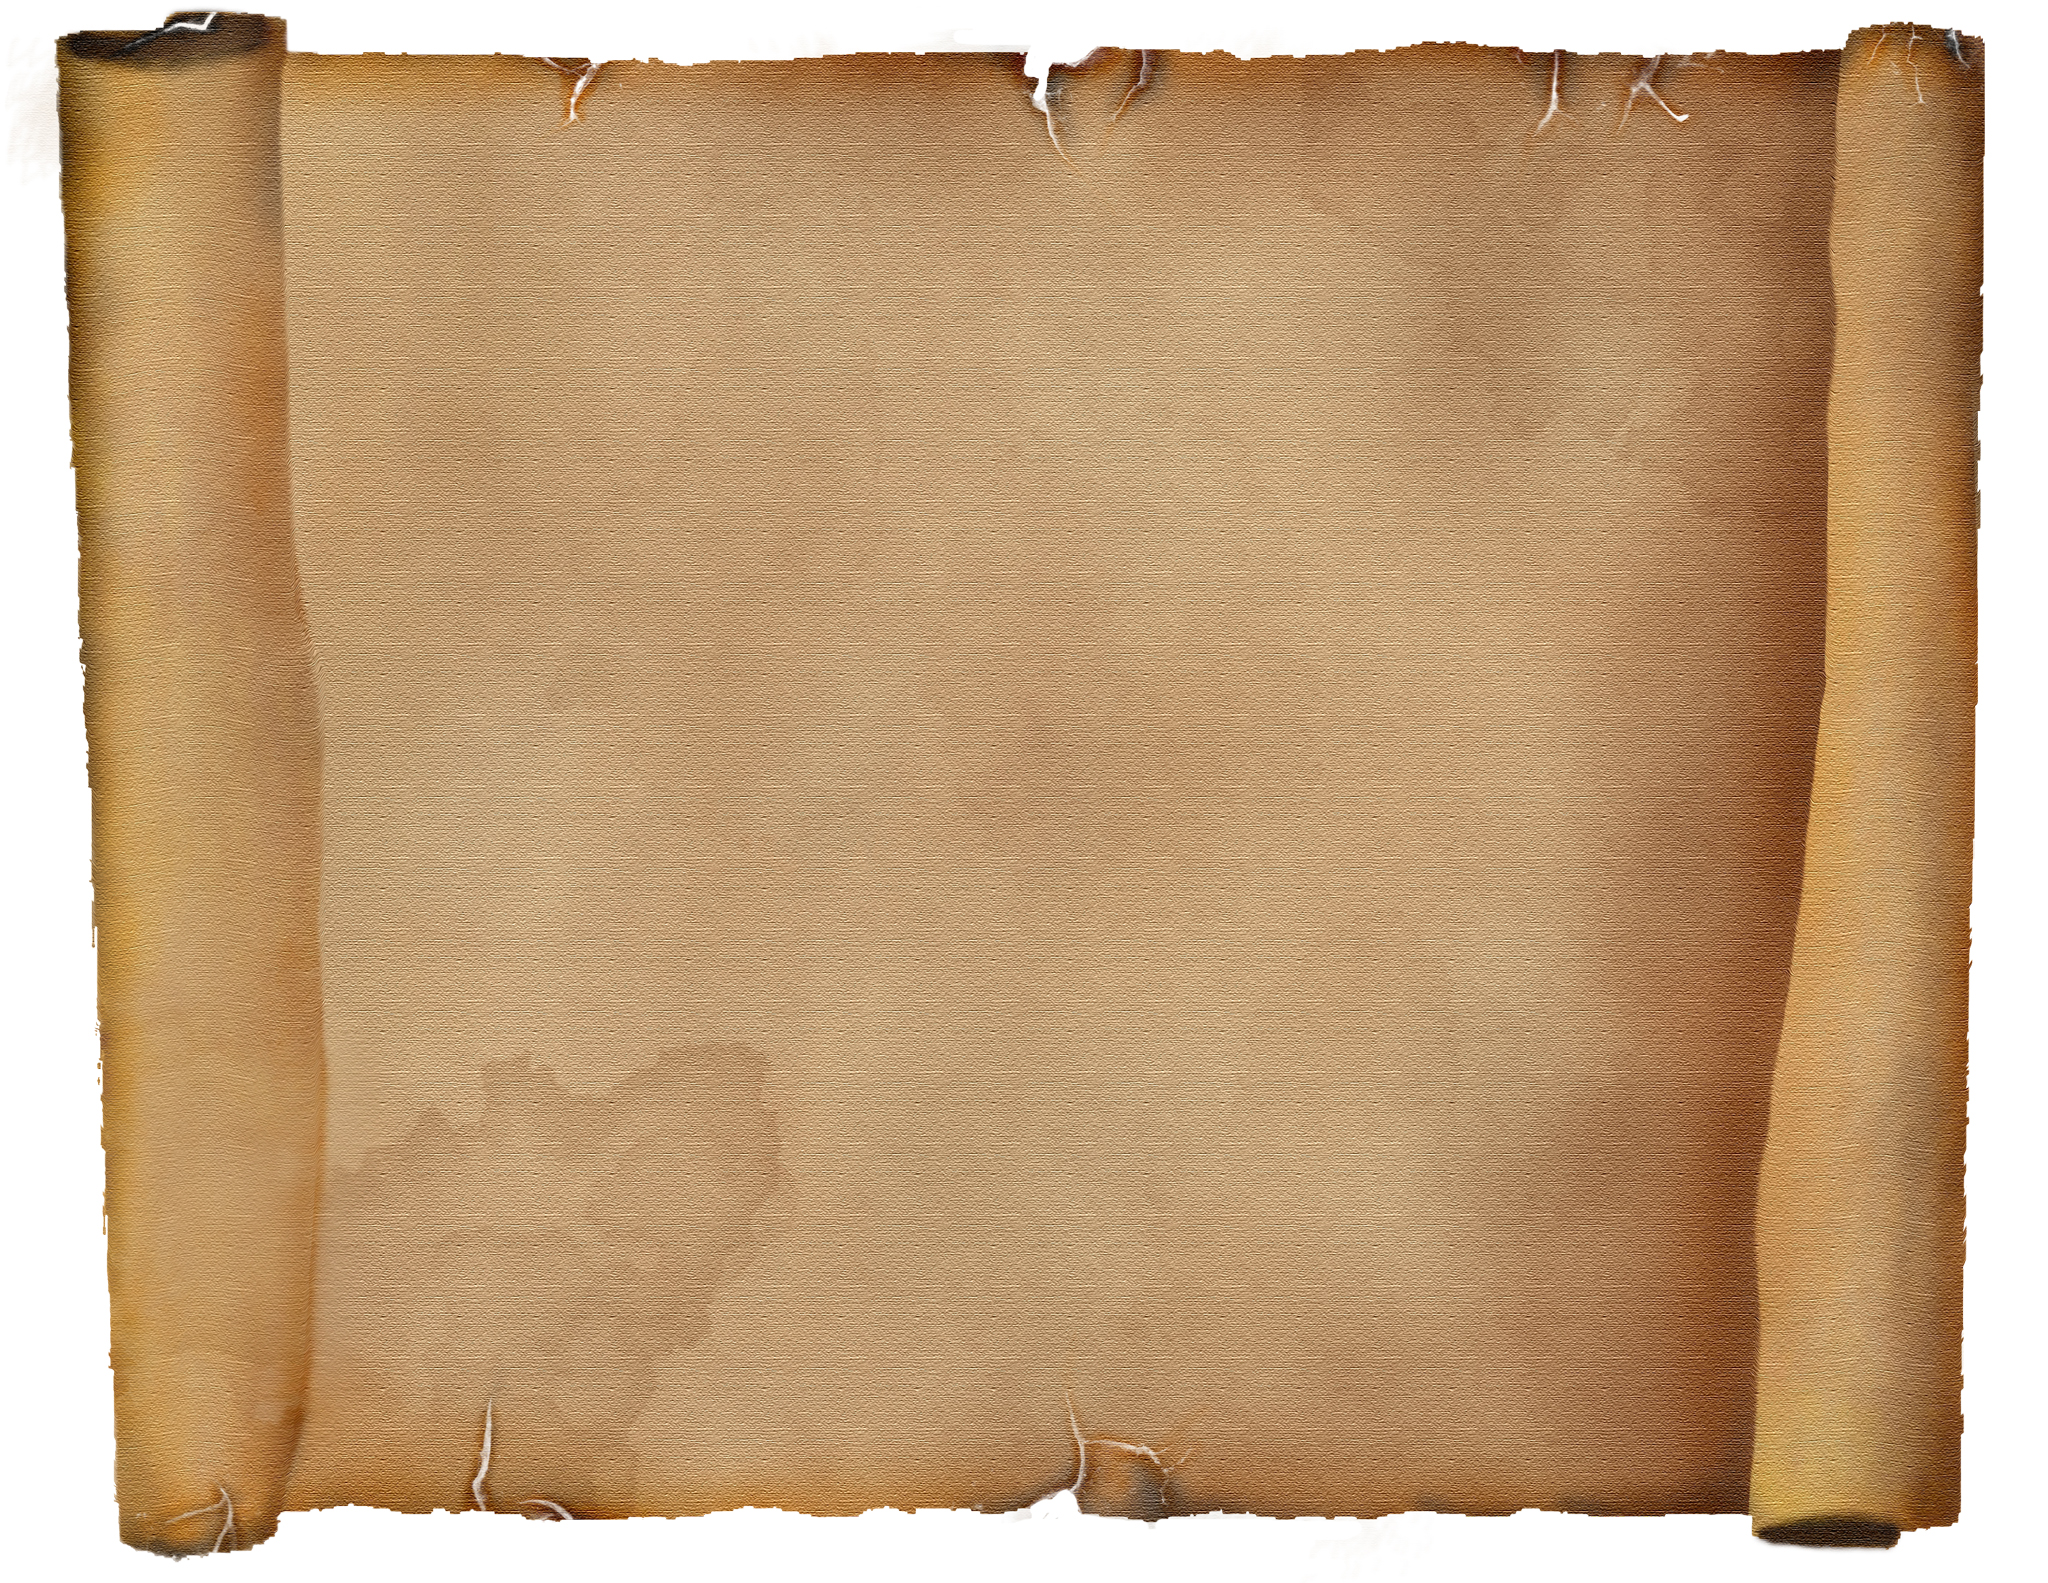 DeviantArt: More Like Old Scroll Texture III by Esther-Sanz